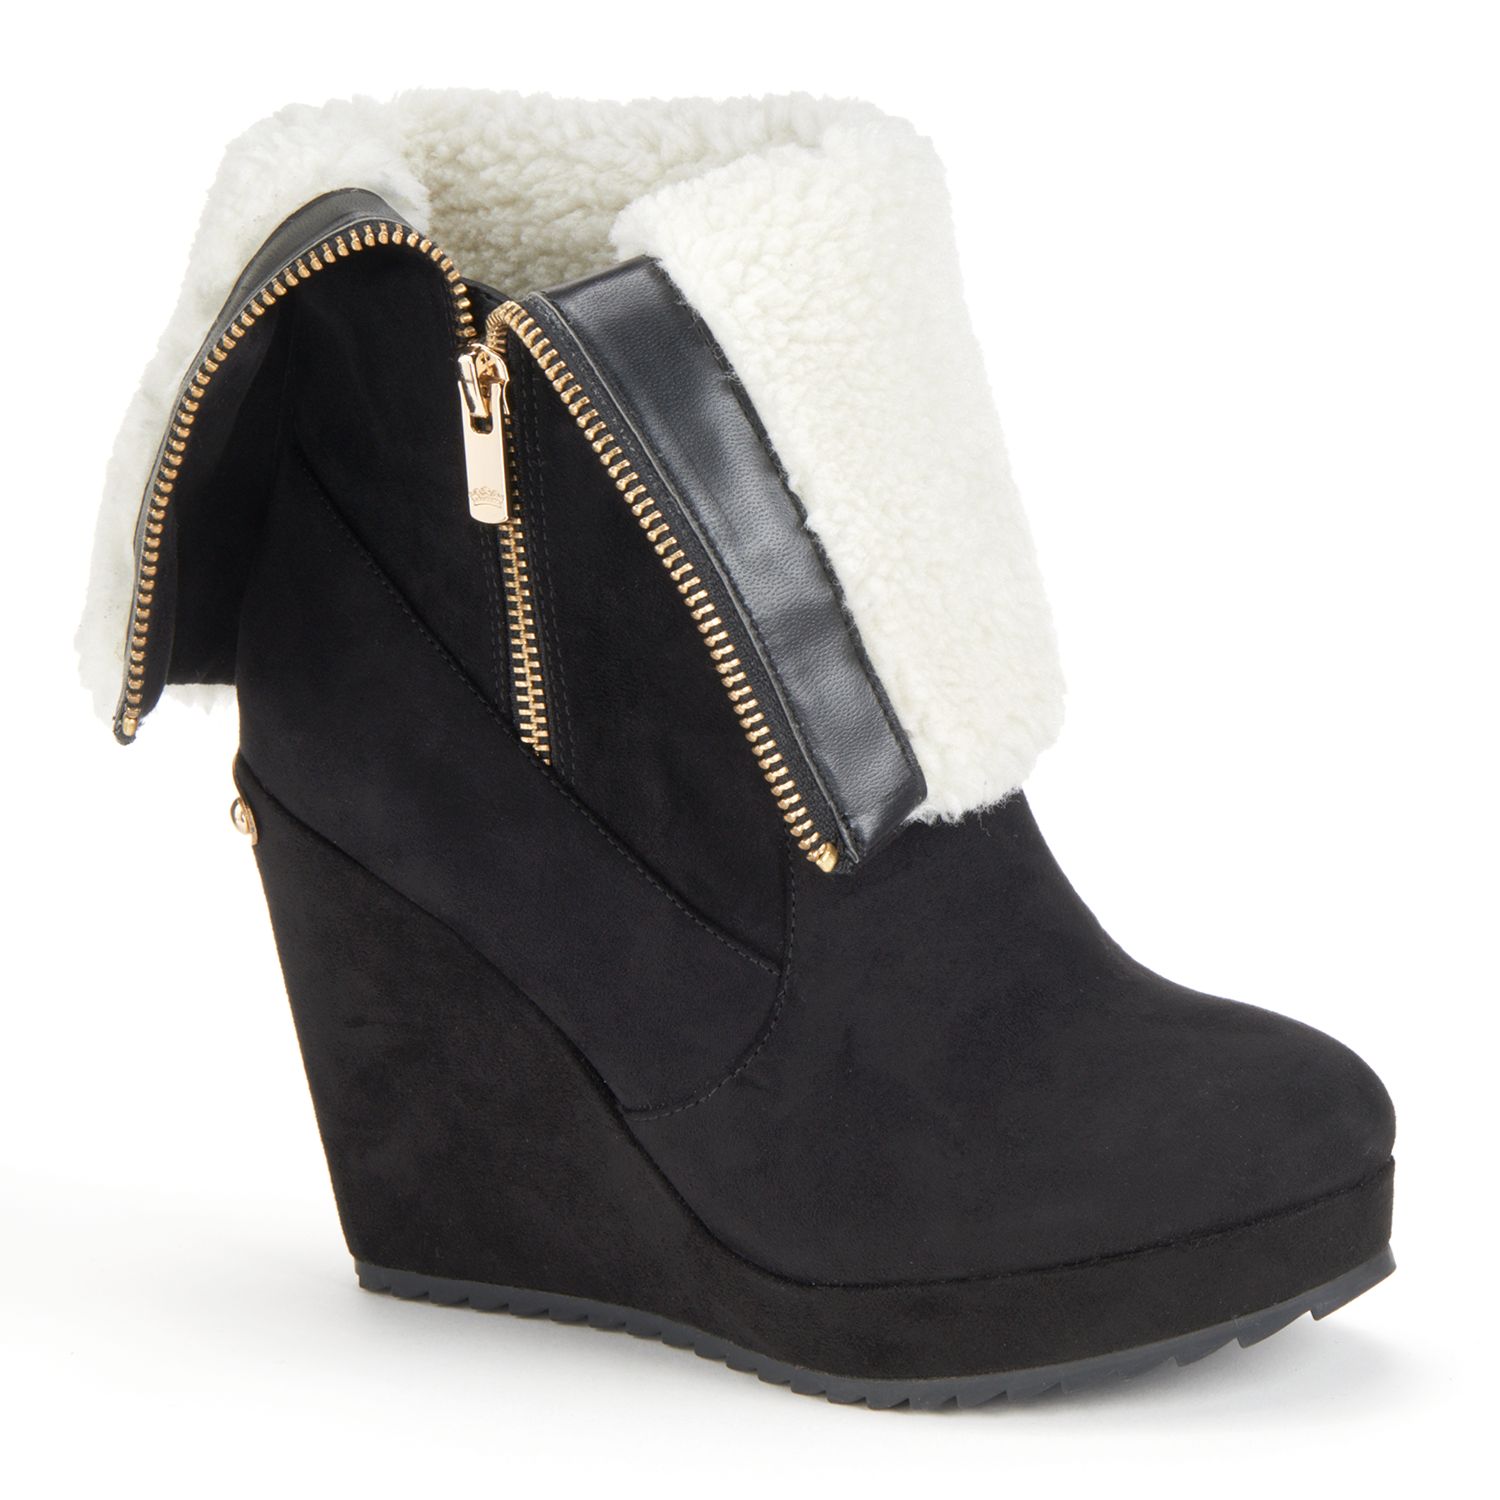 JUICY COUTURE BLACK KASIA WOMEN'S FOLD-OVER PLATFORM WEDGE ANKLE BOOTS